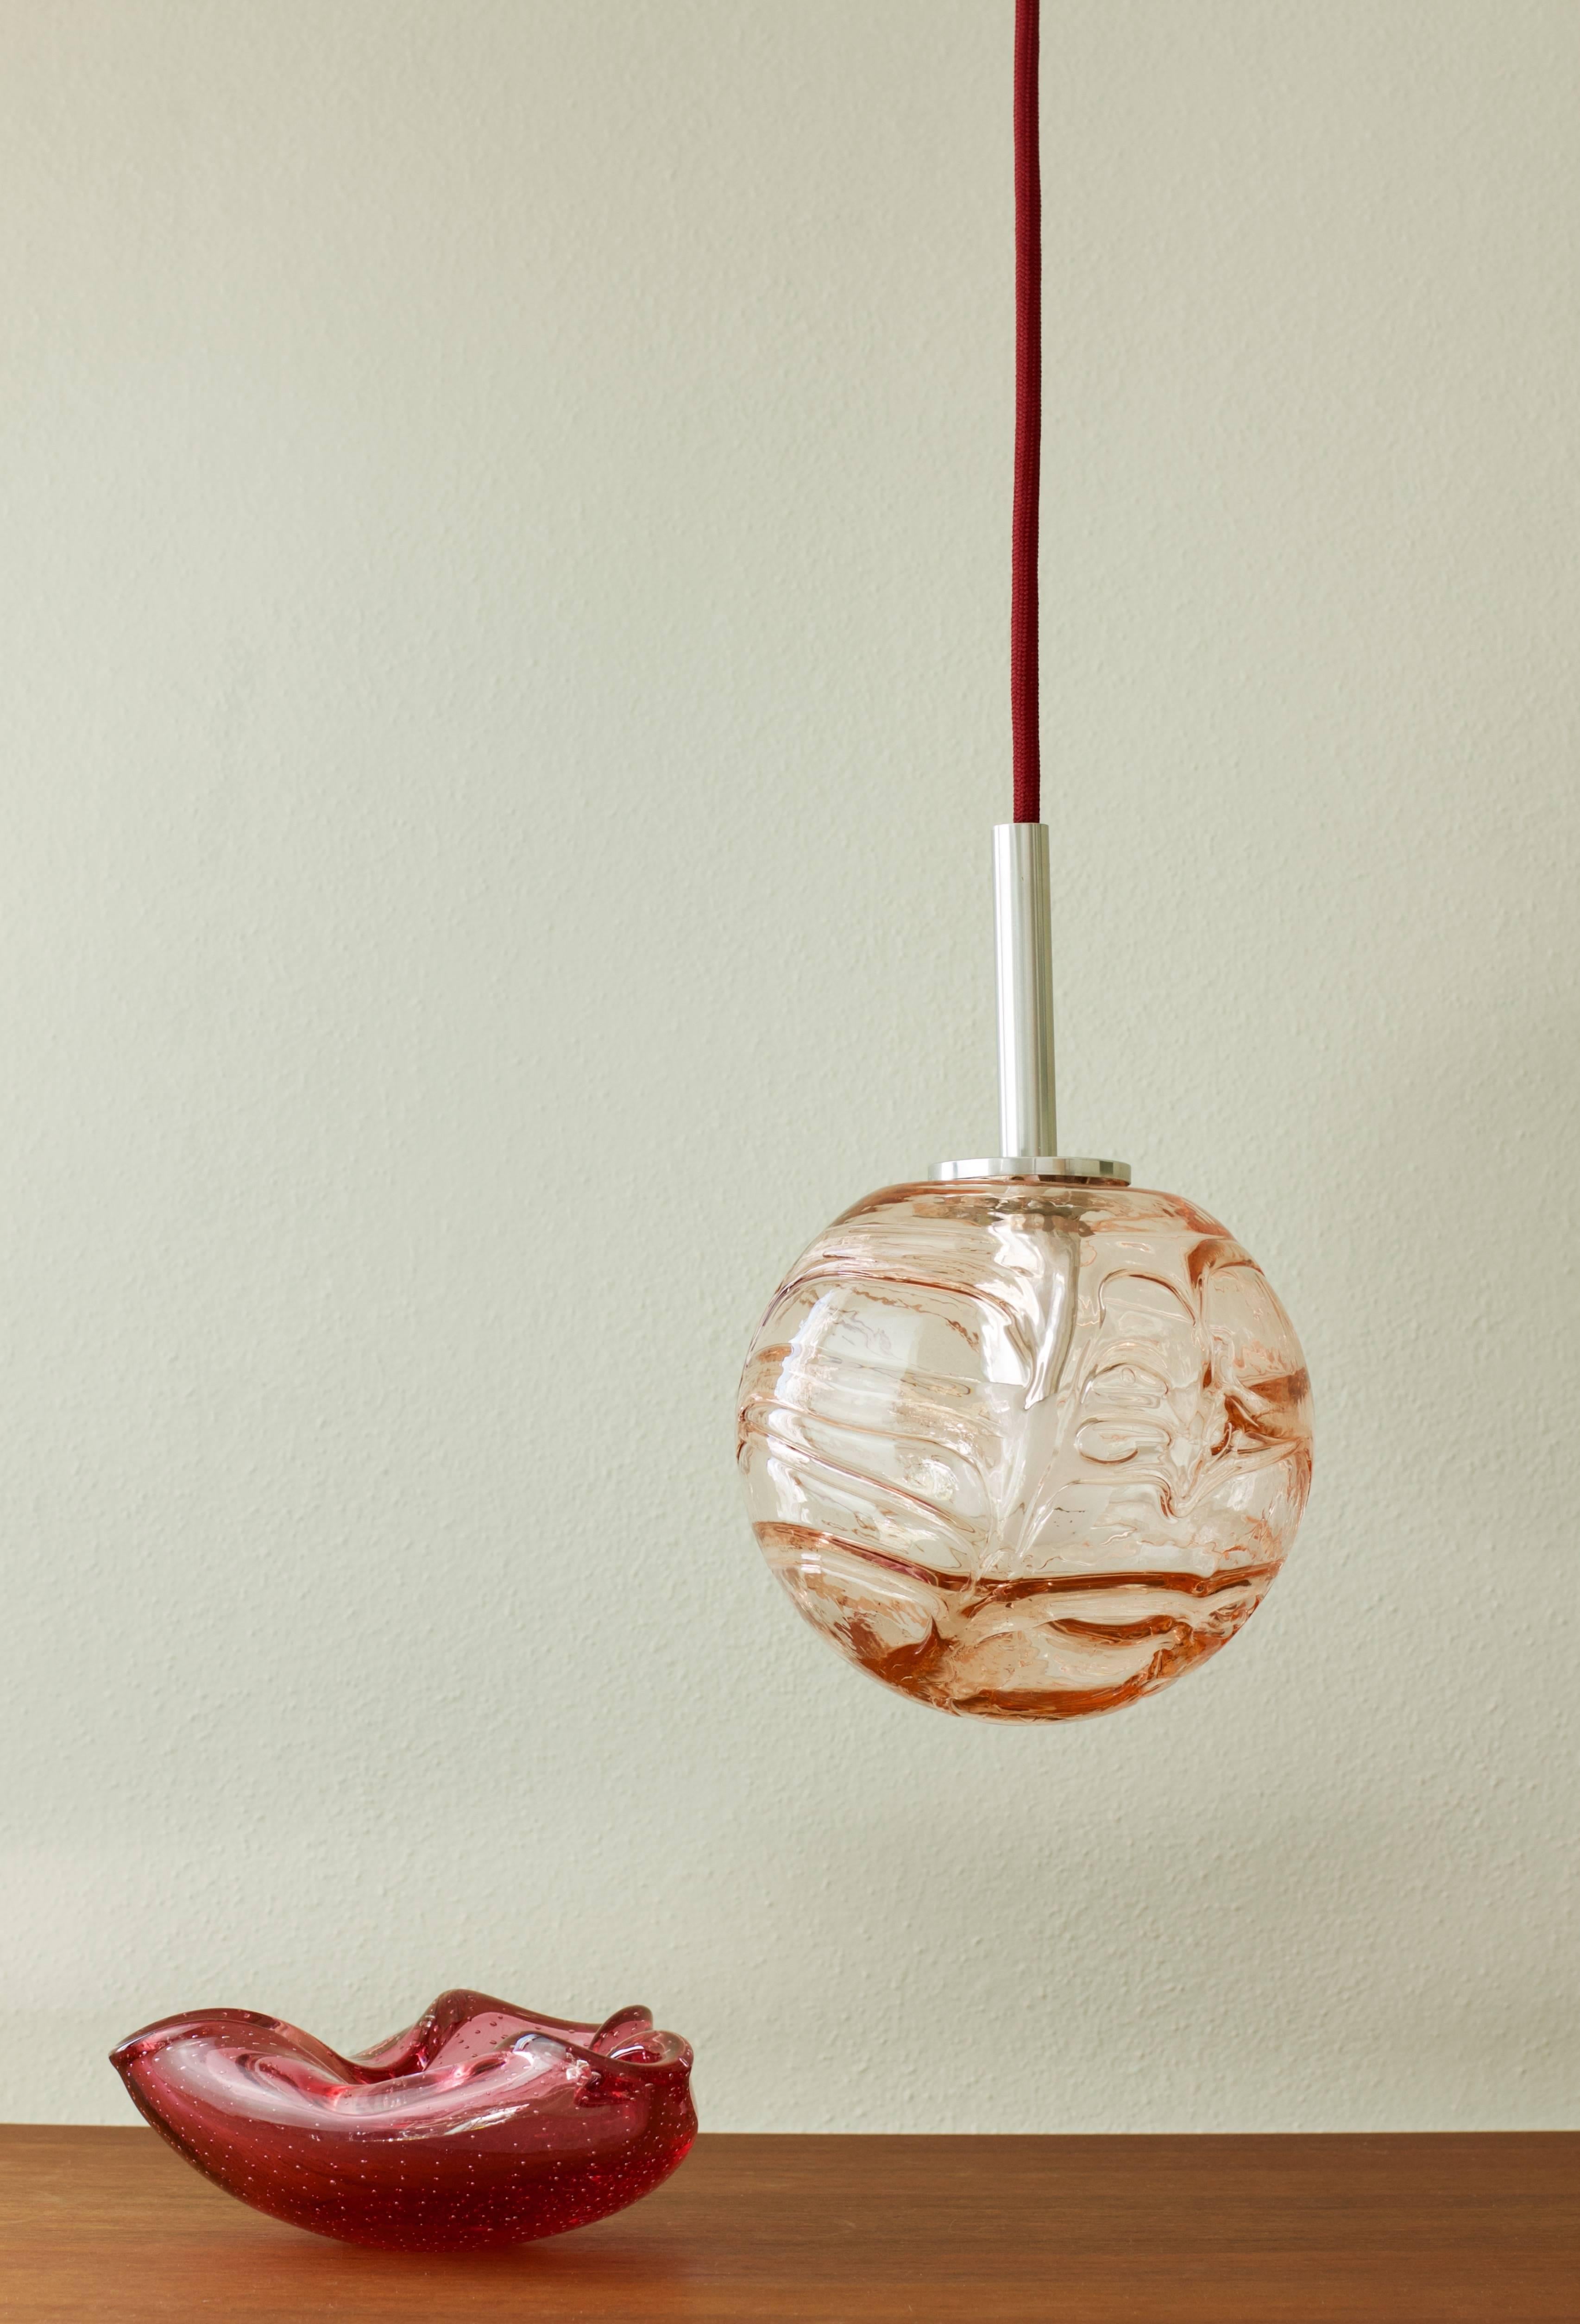 20th Century Small German Pendant Light by Doria Leuchten with Pink Toned Murano Glass Globe